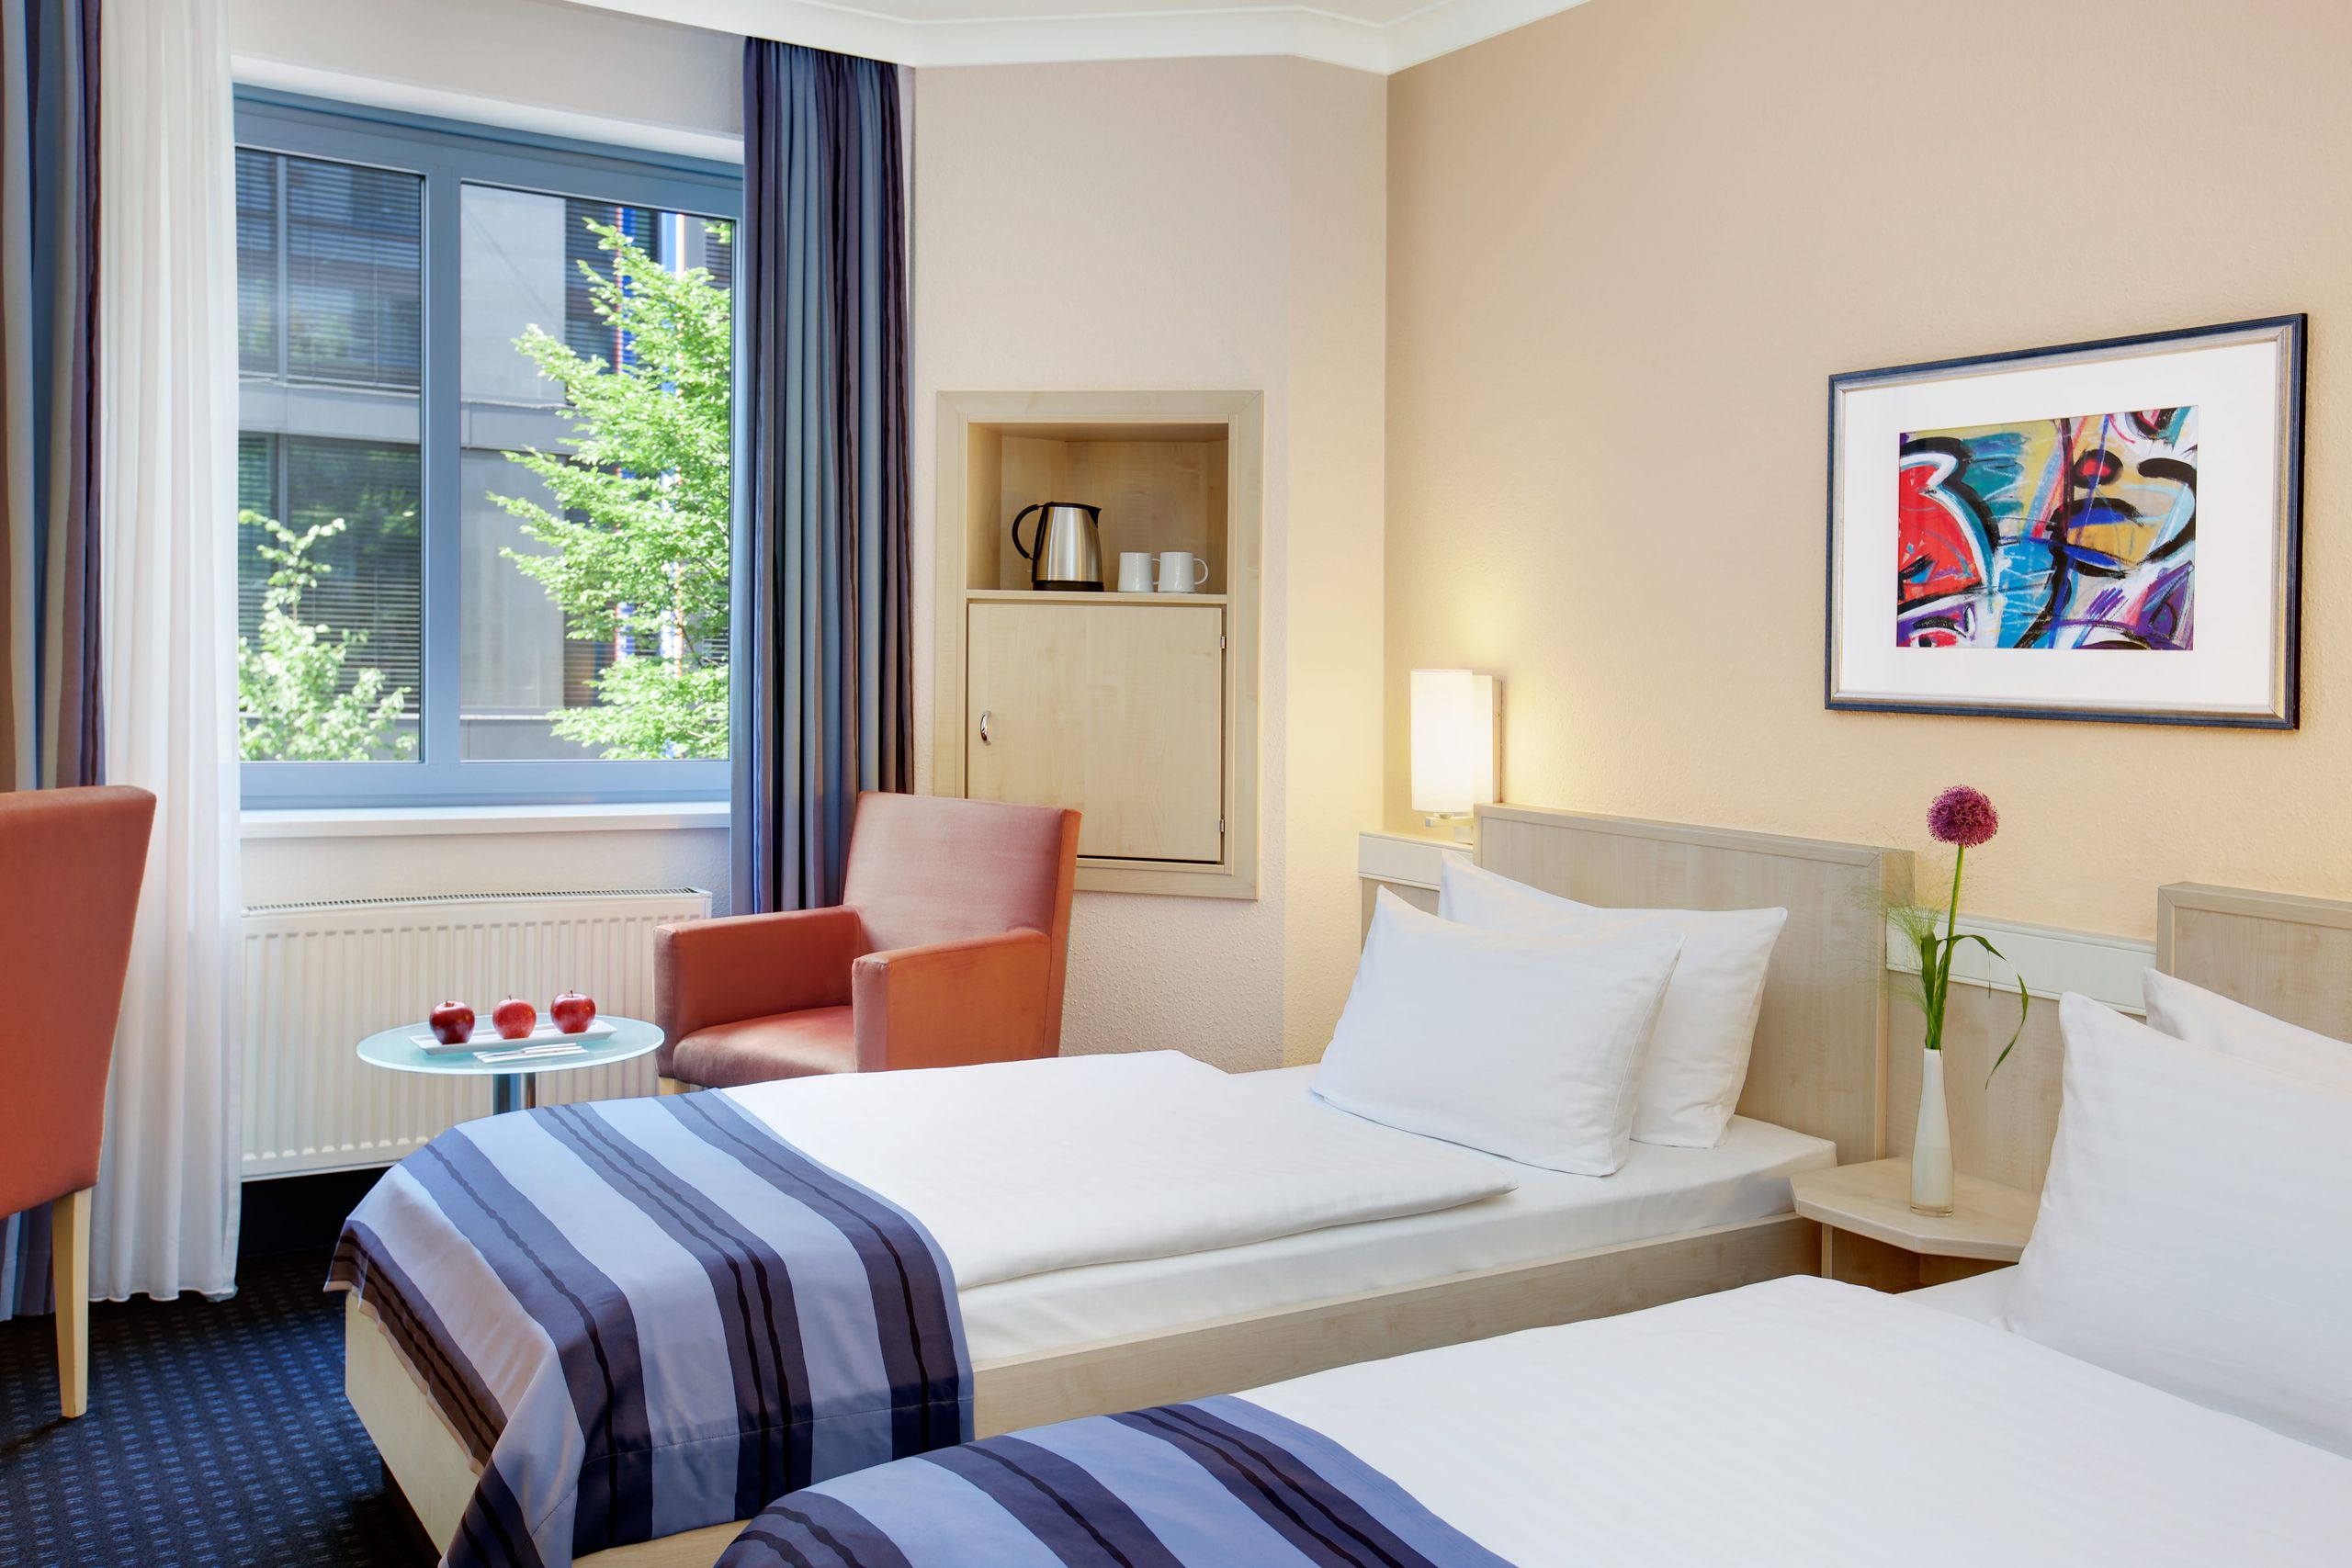 IntercityHotel Nuremberg - Chambre d'affaires - twin beds